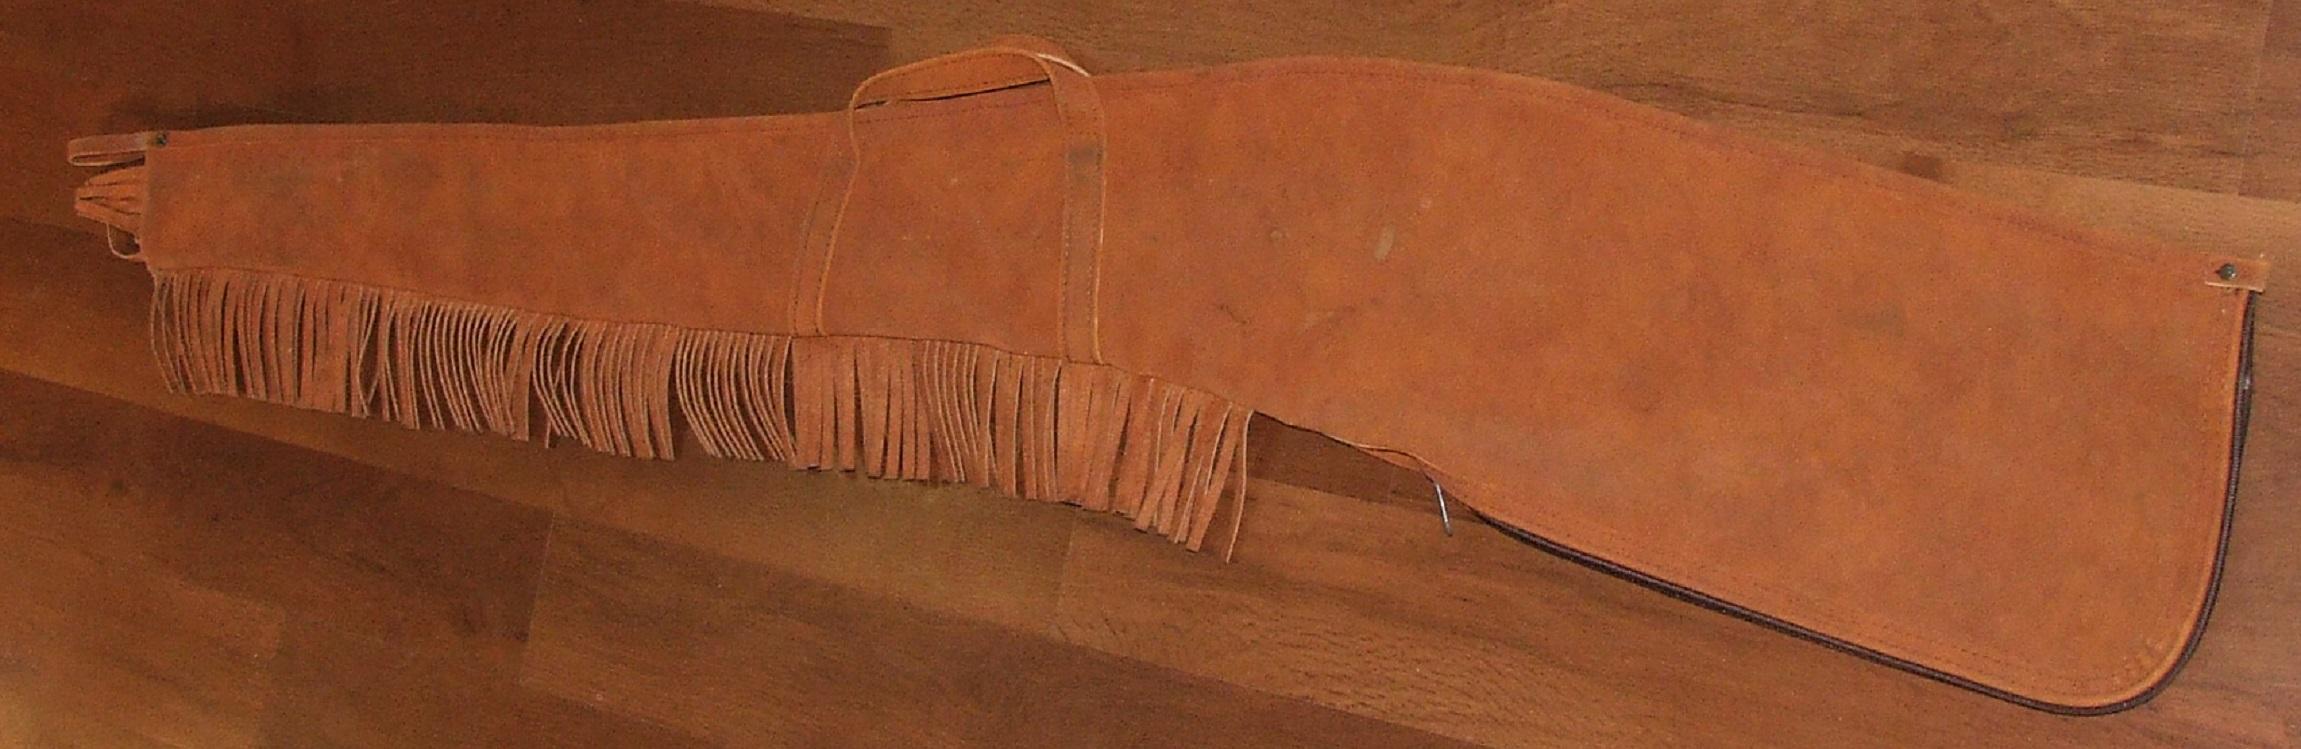 KOLPIN 53 Inch Suede Leather Rifle Case